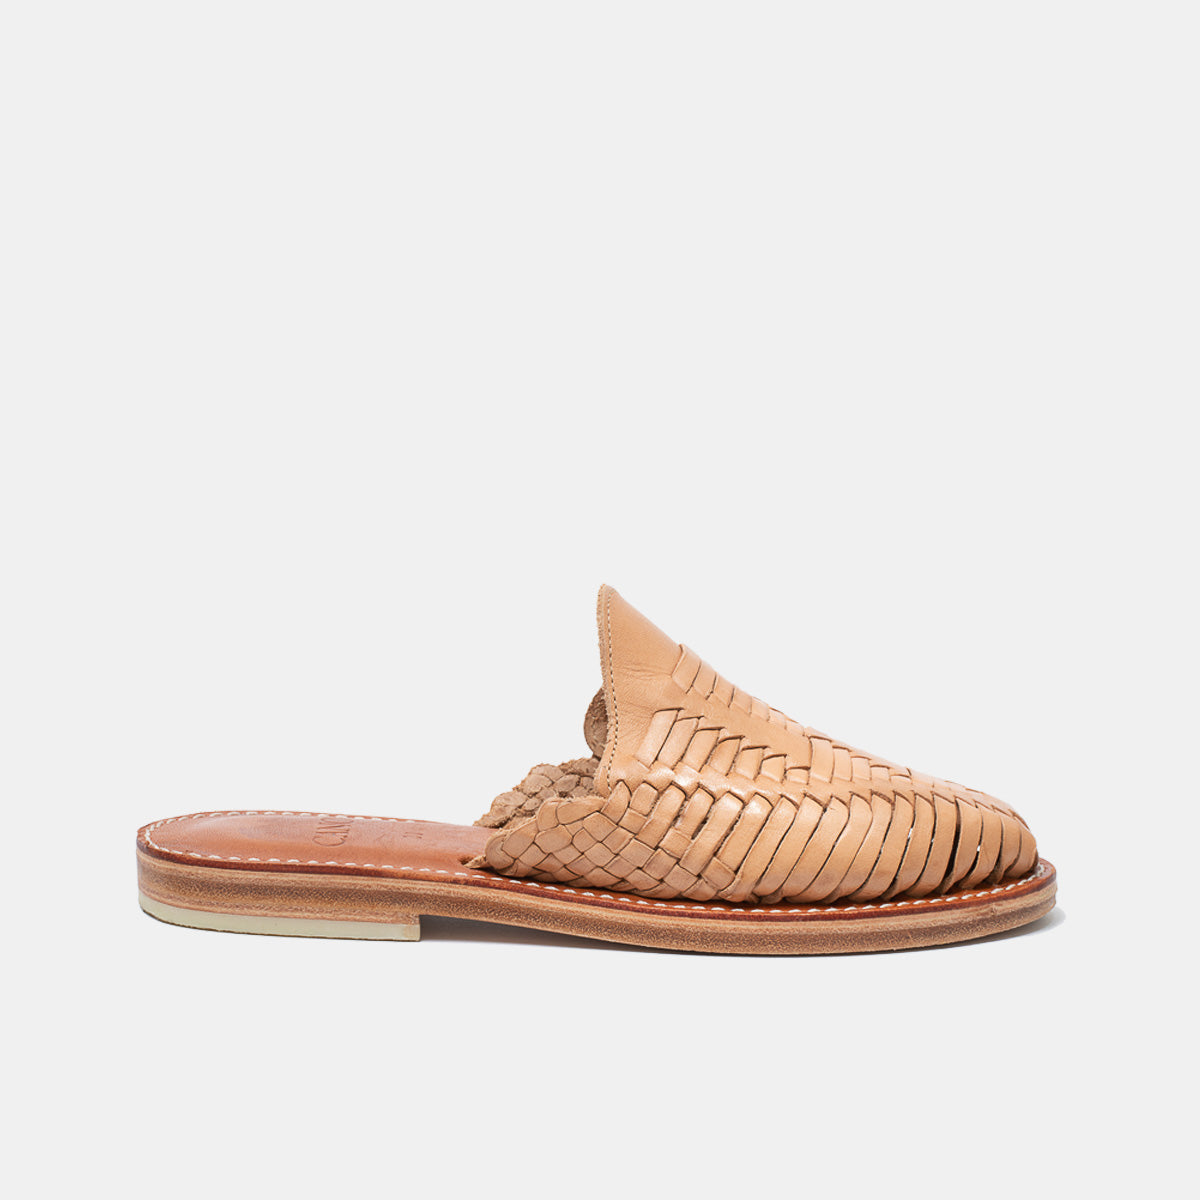 Women's Woven Leather Mules